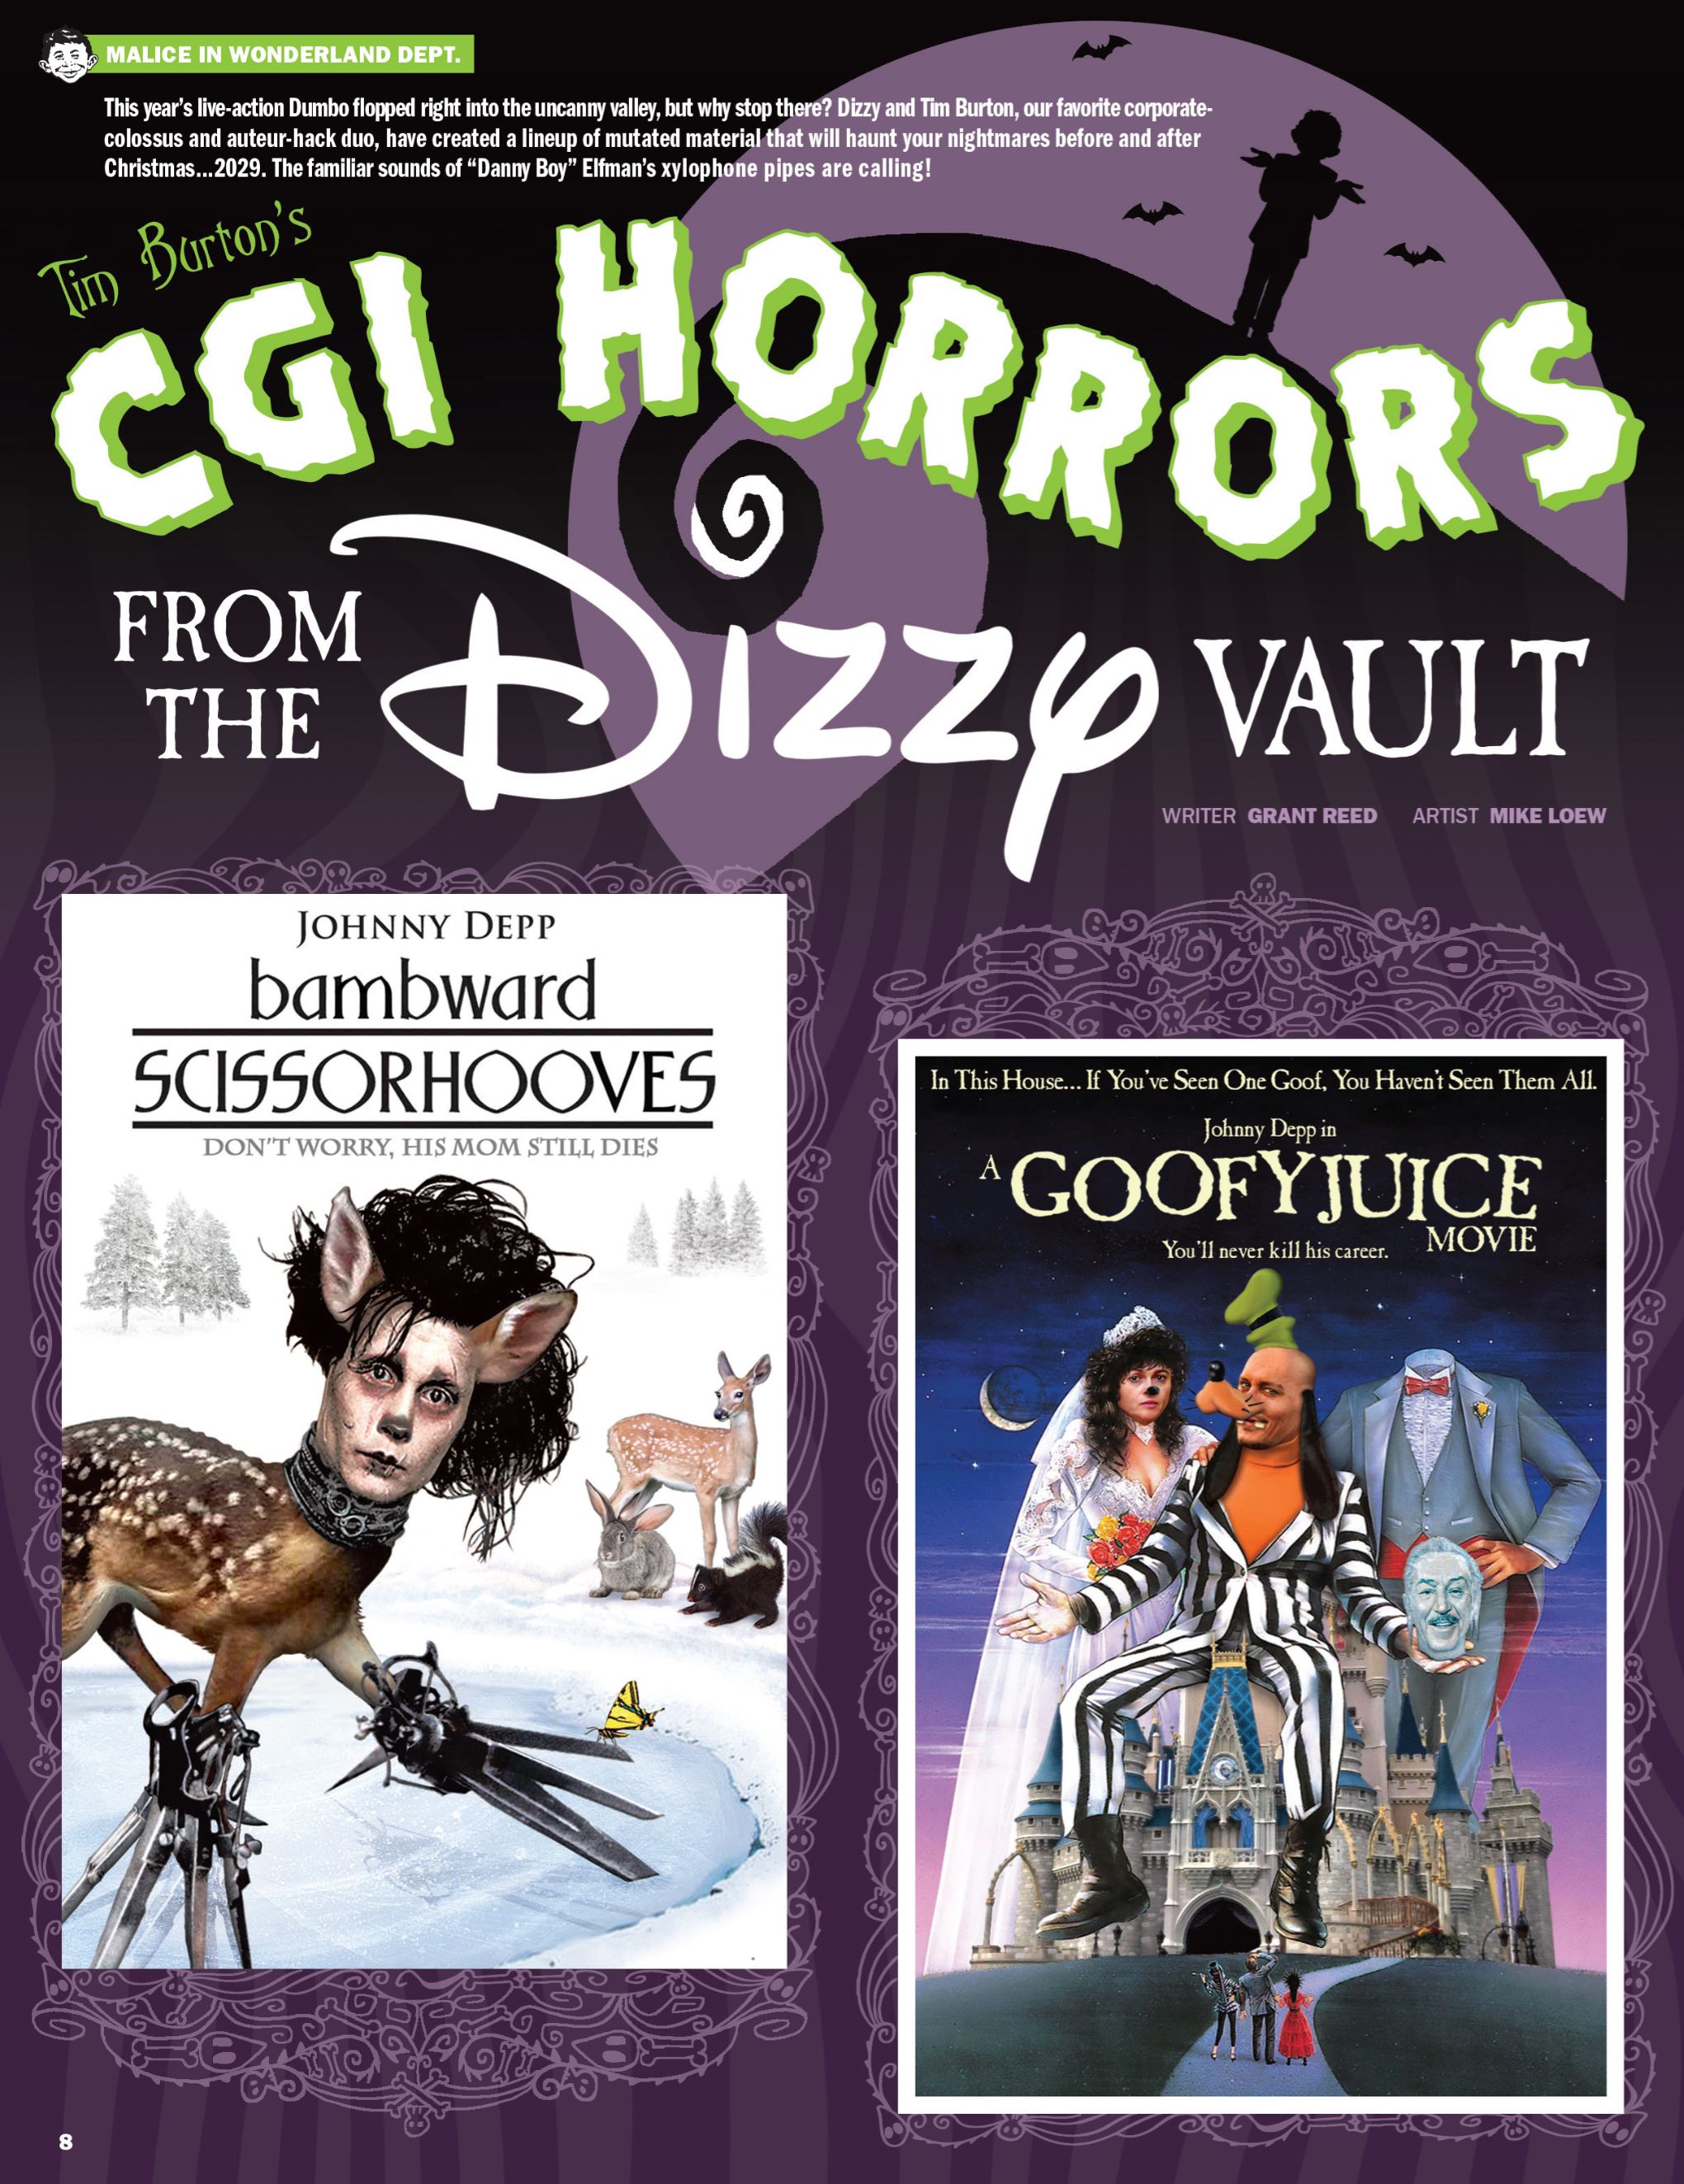 CGI Horrors from the Dizzy Vault Spoof Posters #1